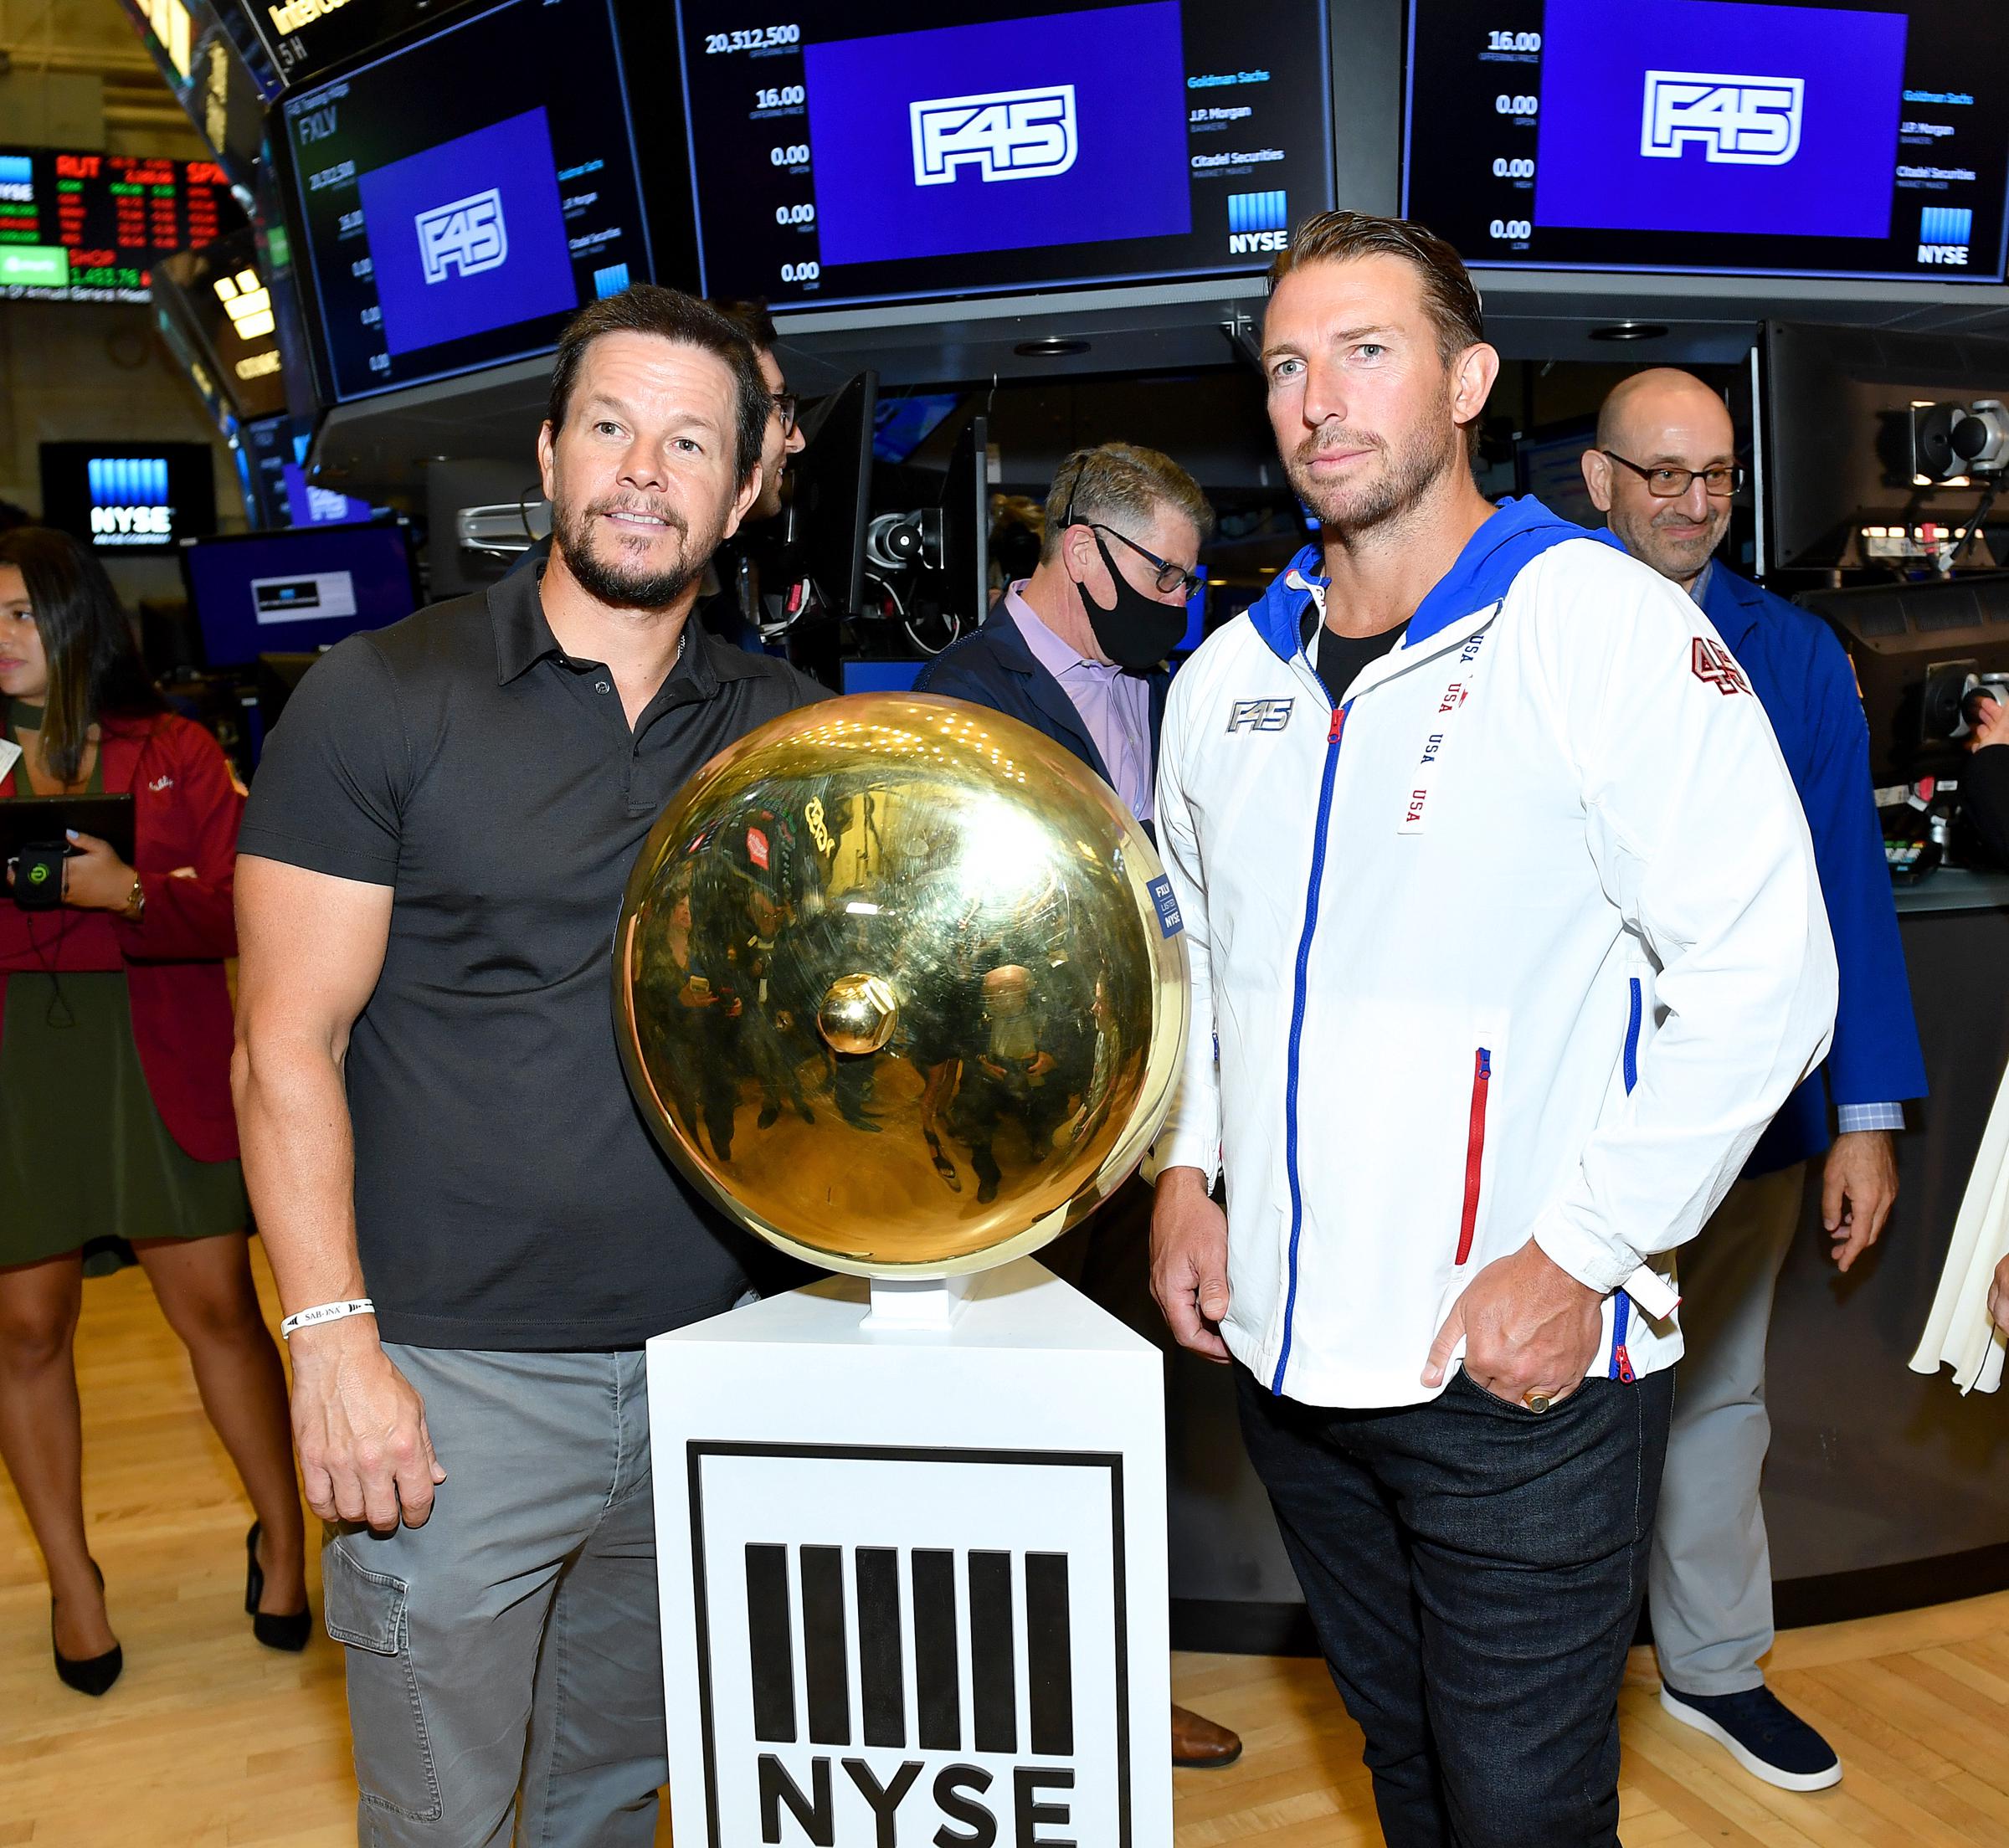 Mark Wahlberg and F45 Founder/CEO Adam Gilchrist pose at the New York Stock Exchange on July 15, 2021. | Source: Getty Images